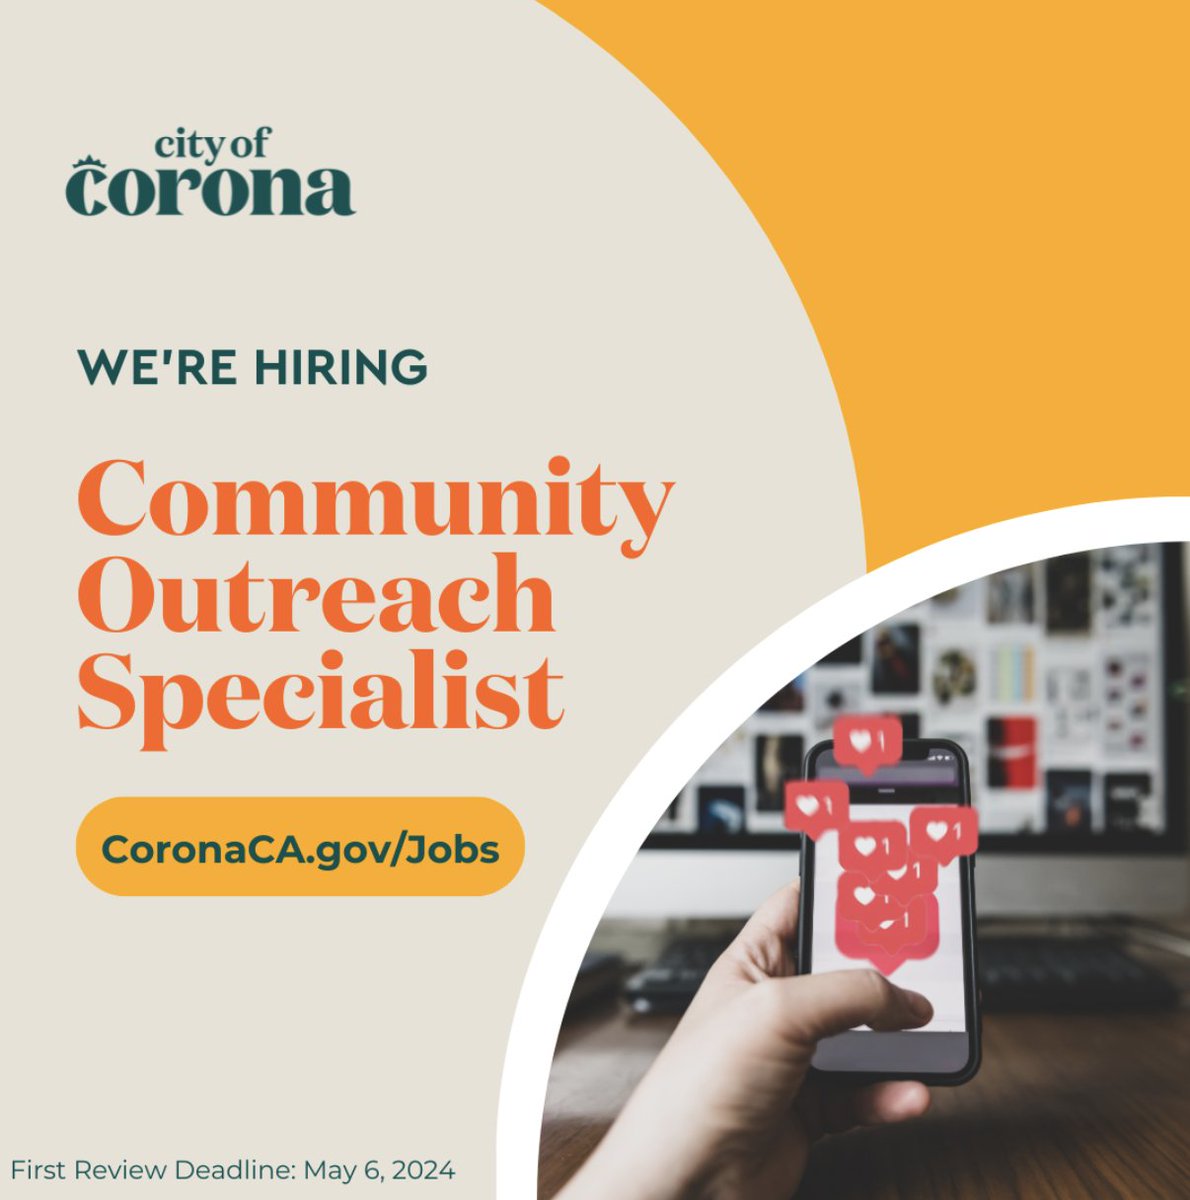 Our Police Department is hiring a Full-Time Benefited Community Outreach Specialist. Read details + apply online: bit.ly/447DLxX